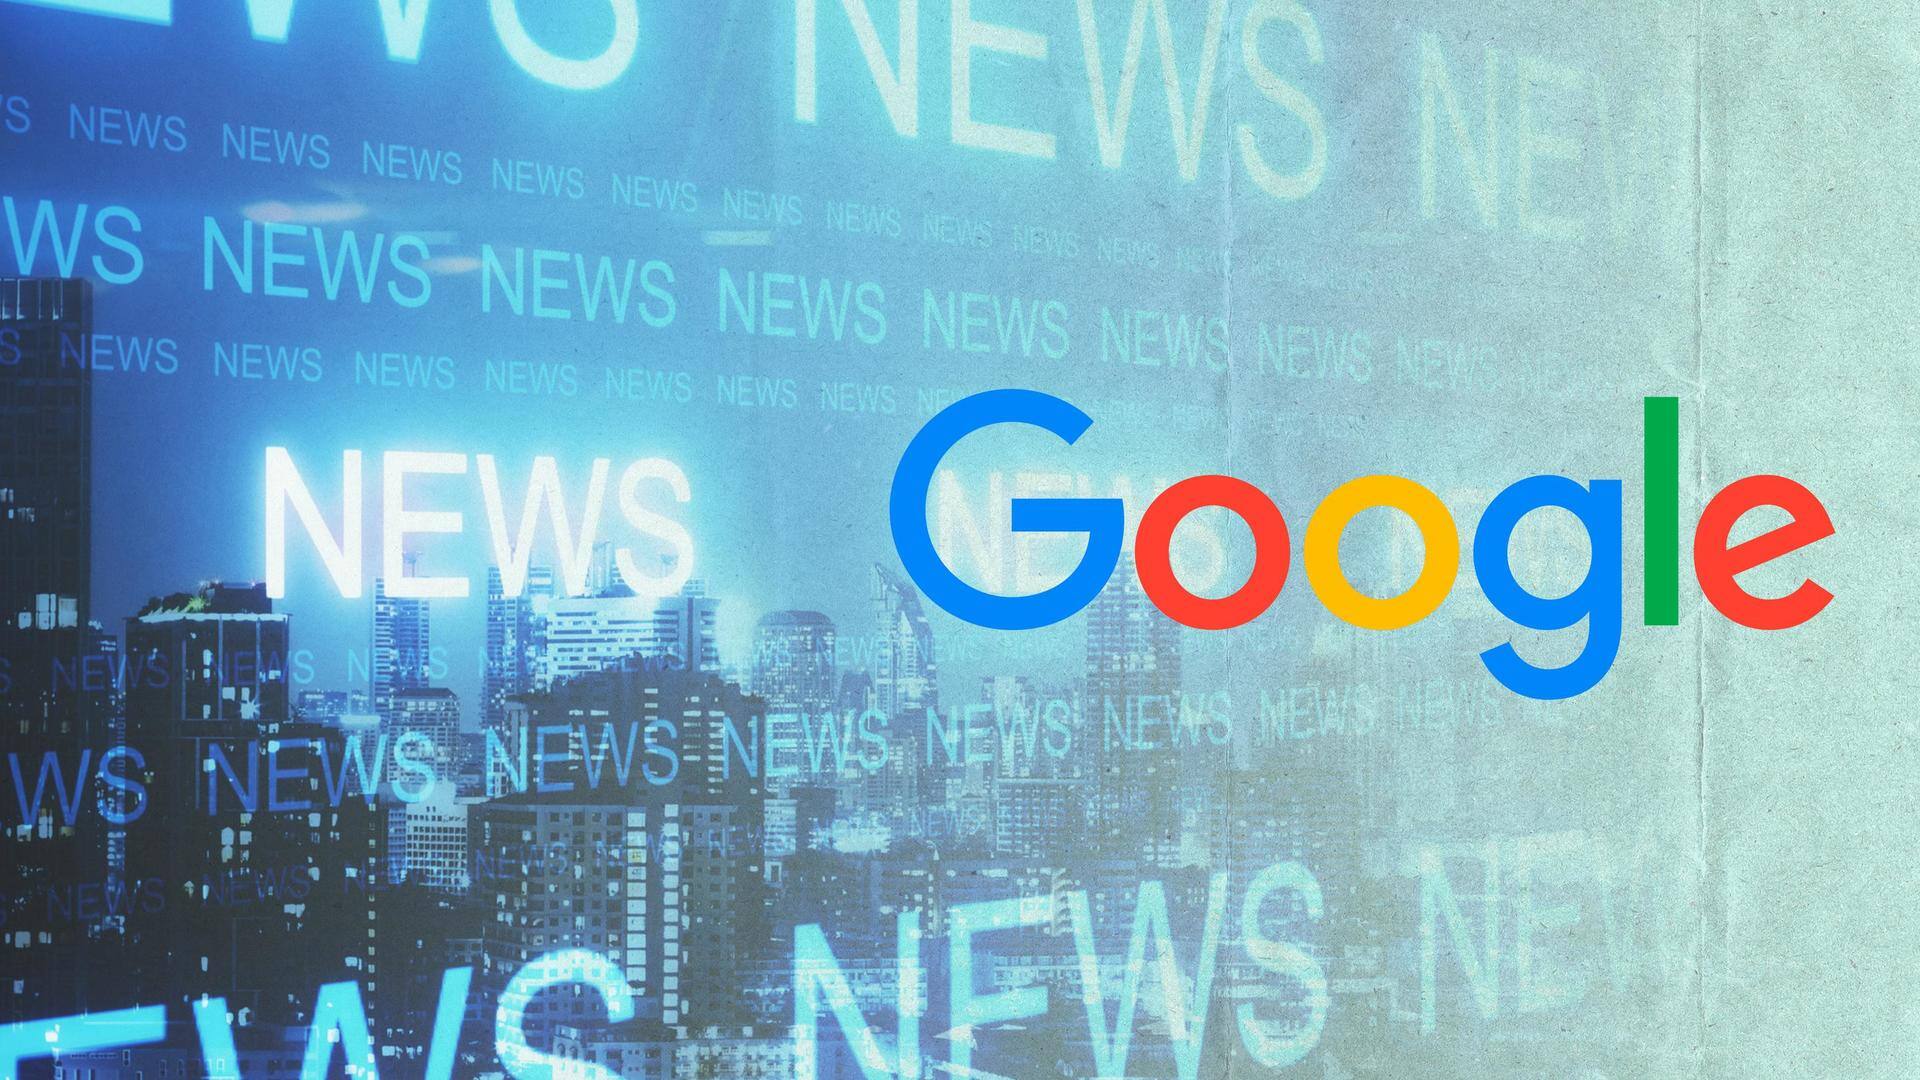 Google tests AI news writing tool: How it will work